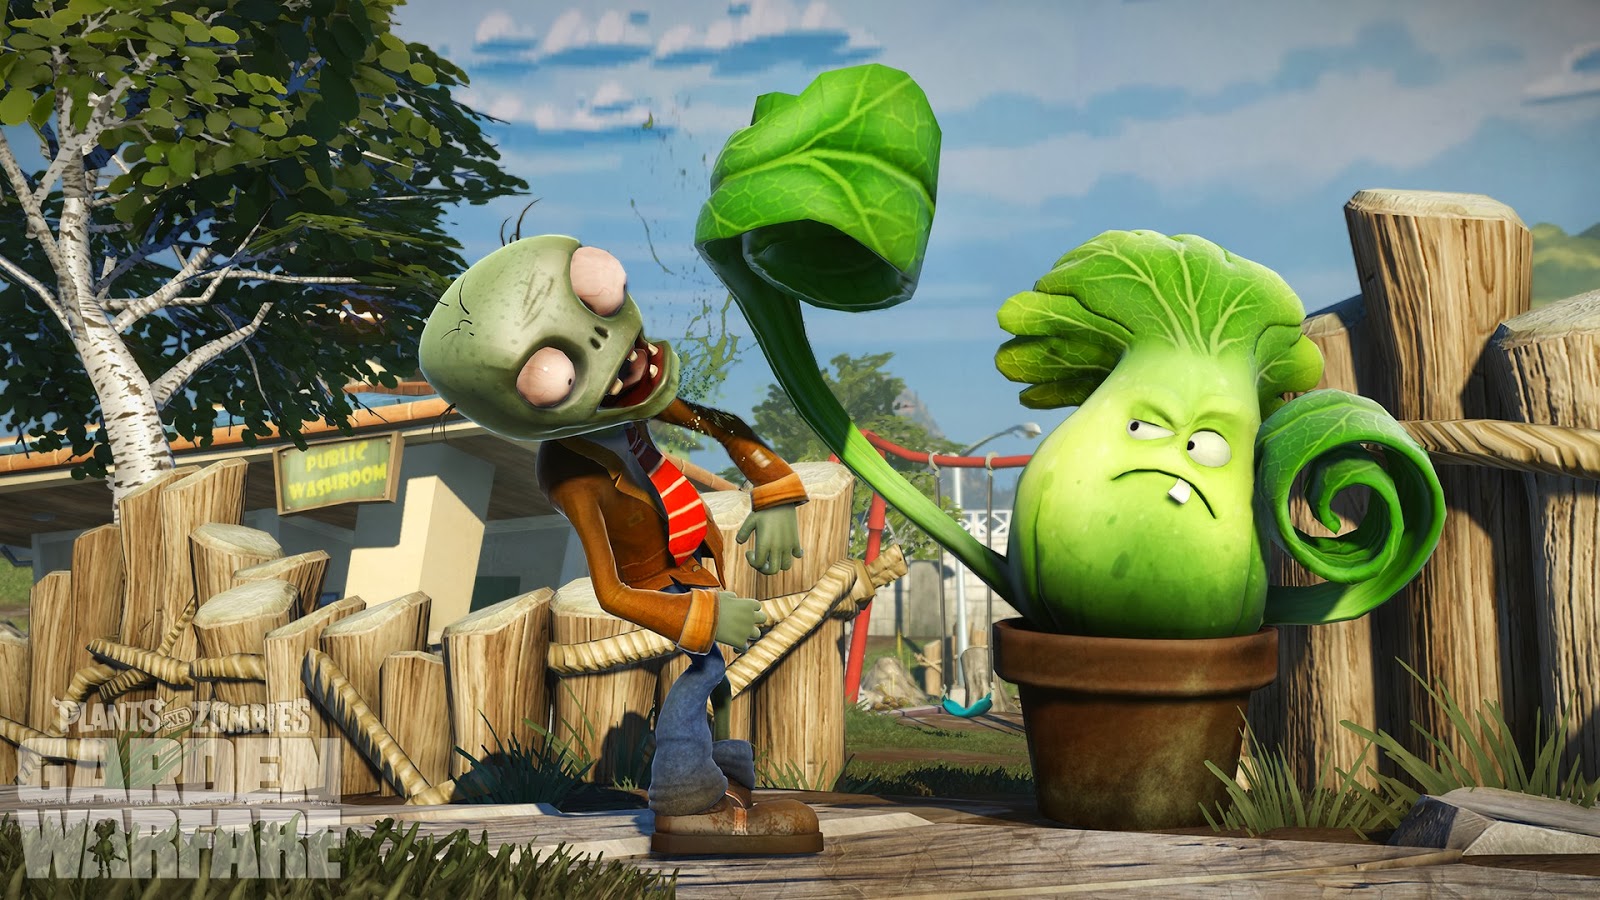 Free Download Plants Vs Zombies 2 Hd Wallpapers Blog [1600x900] For Your Desktop Mobile